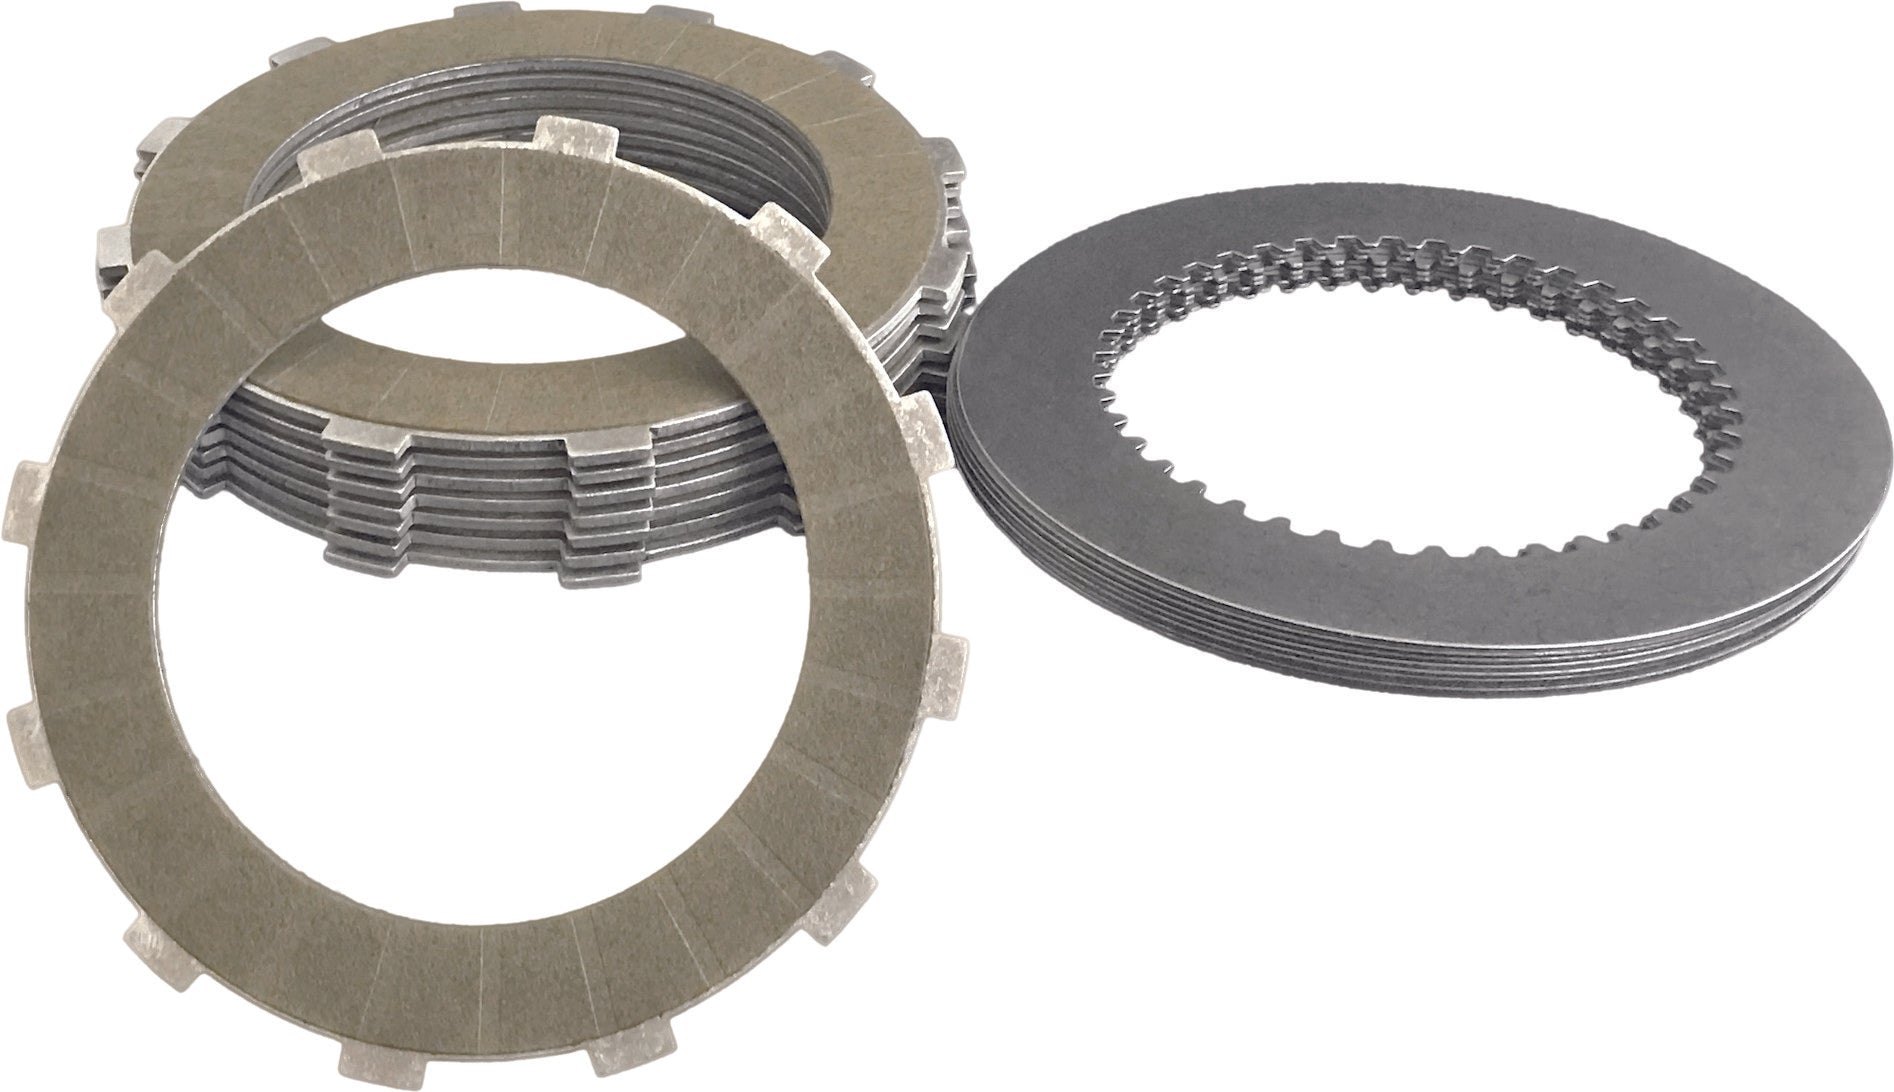 ENERGY ONE, ENERGY ONE E1 CLUTCH KIT FOR RIVERA PRO 11-17 RP-0200